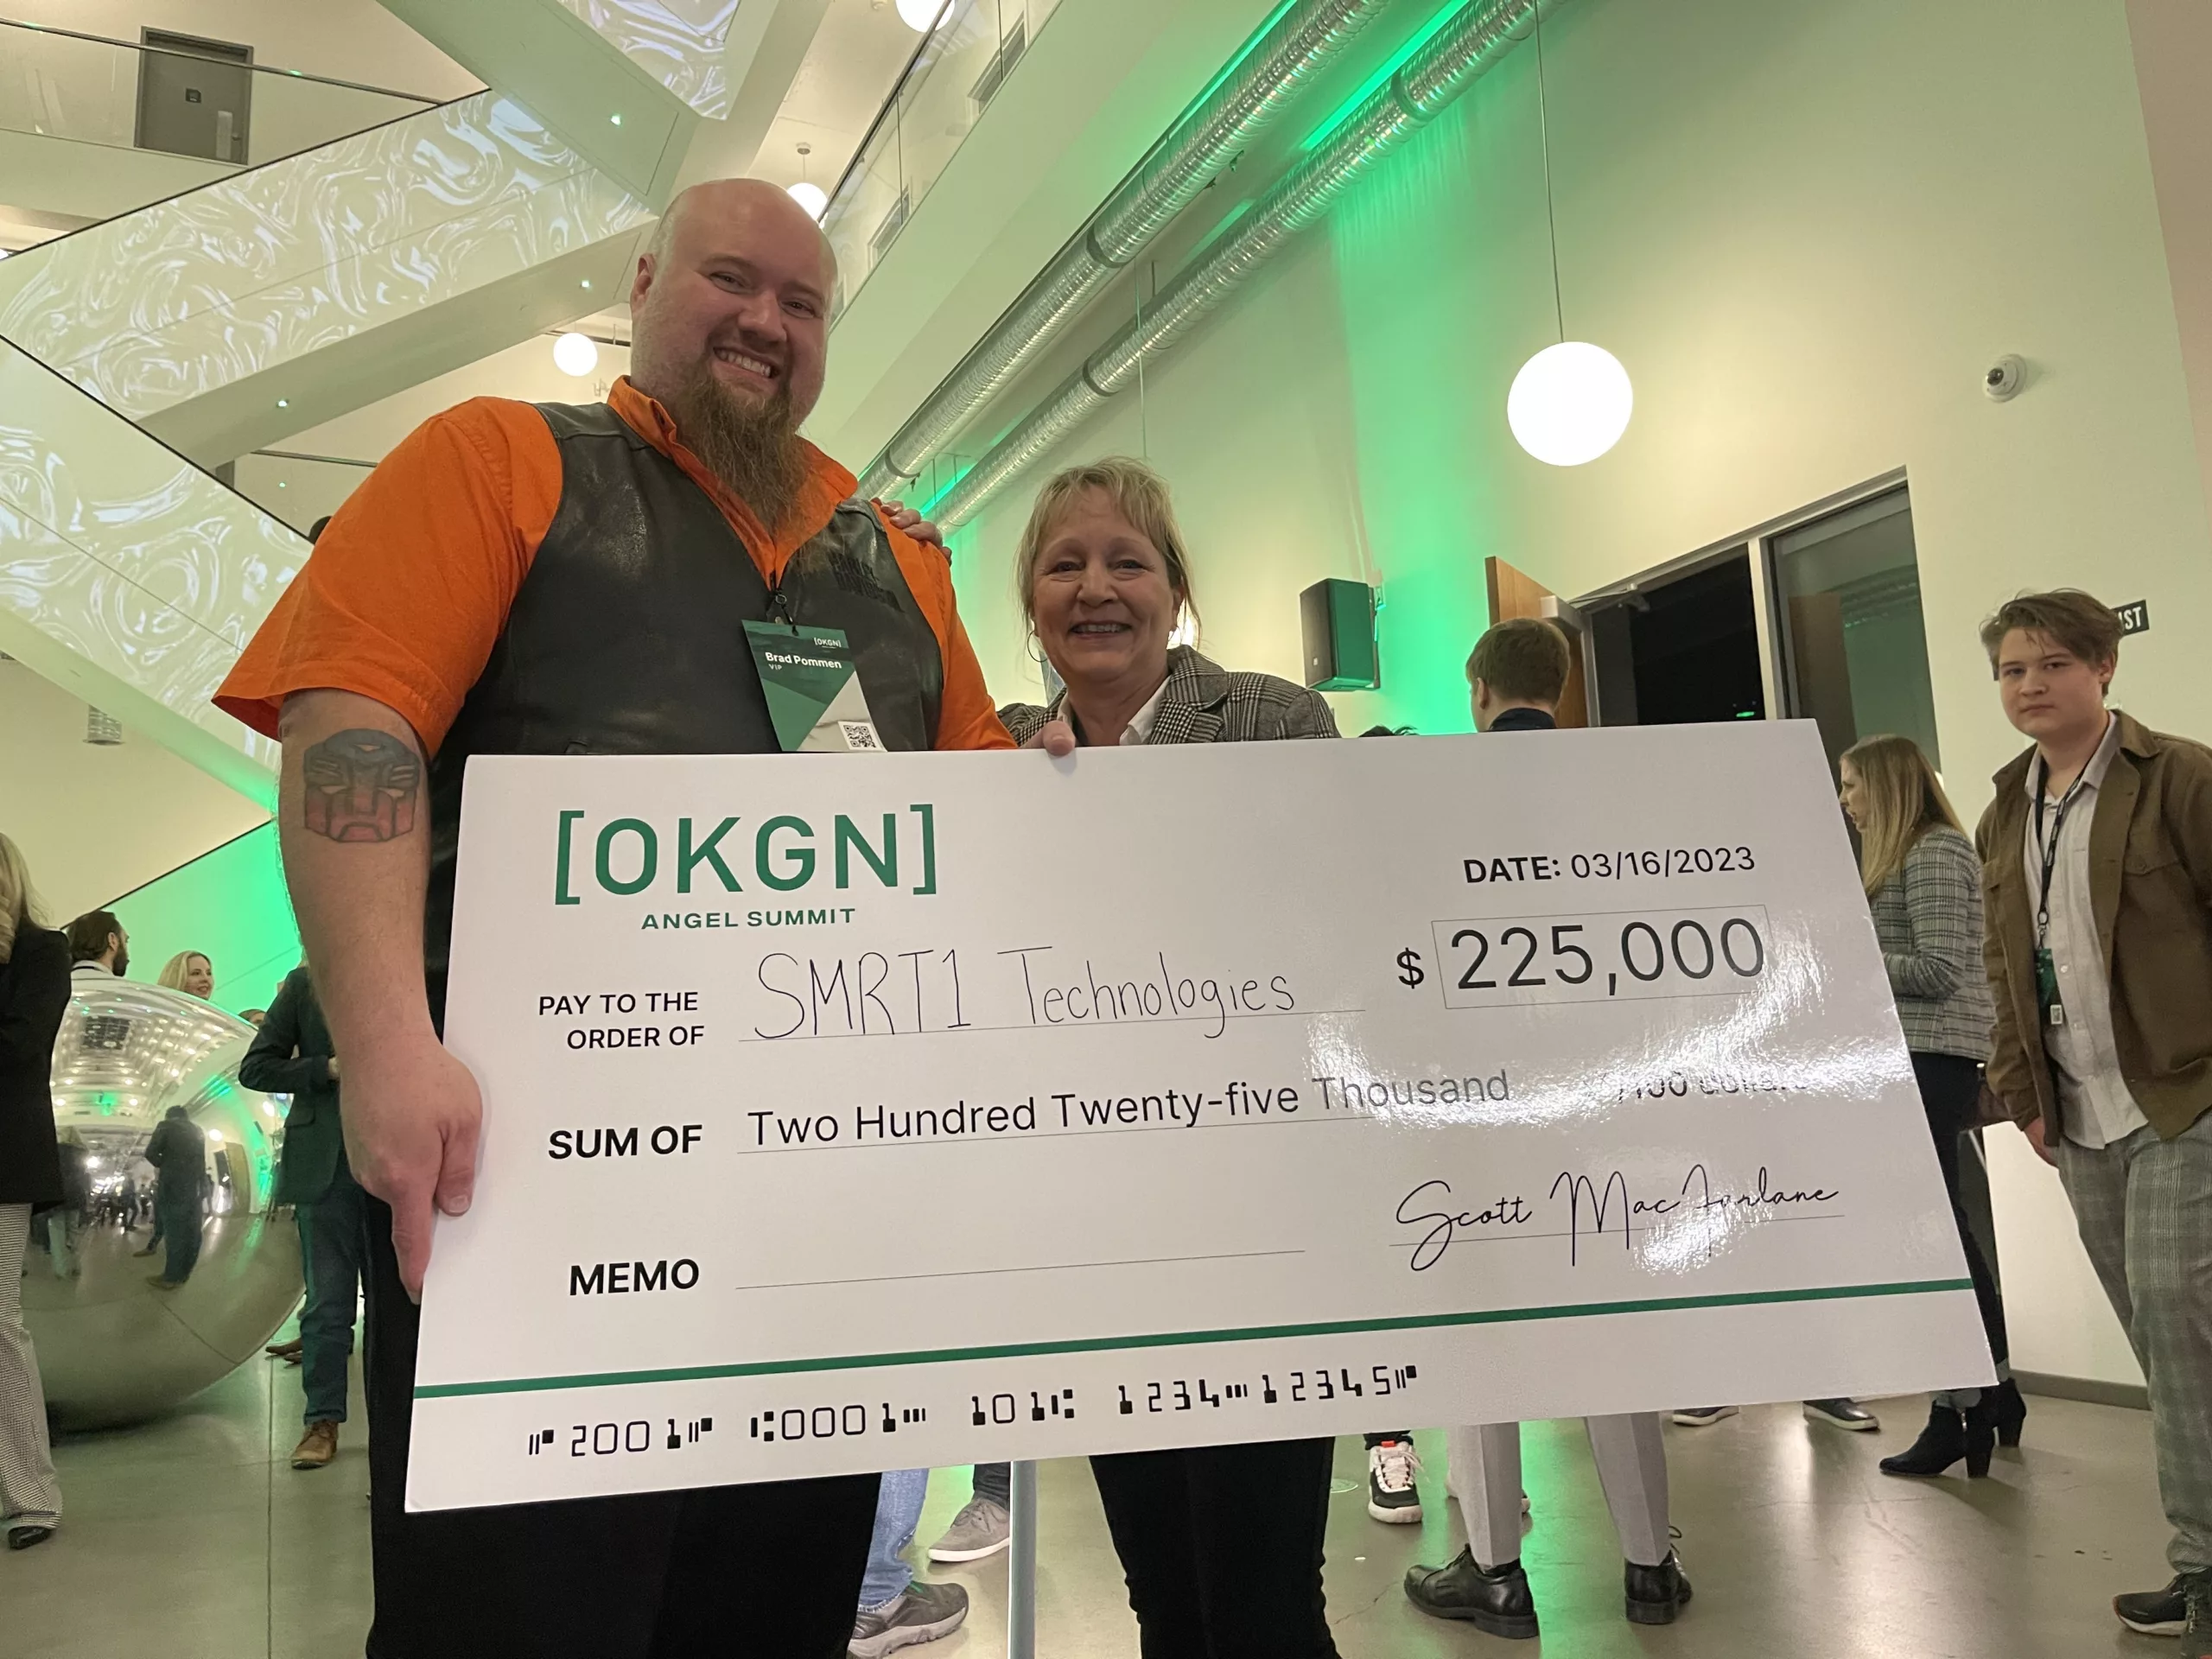 Brad Pommen CEO SMRT1 Technologies standing beside Margret Jennings COO SMRT1 Technologies holding large cheque for $225,000 for first place in OKGN Angel Summit. competition. They are smiling.